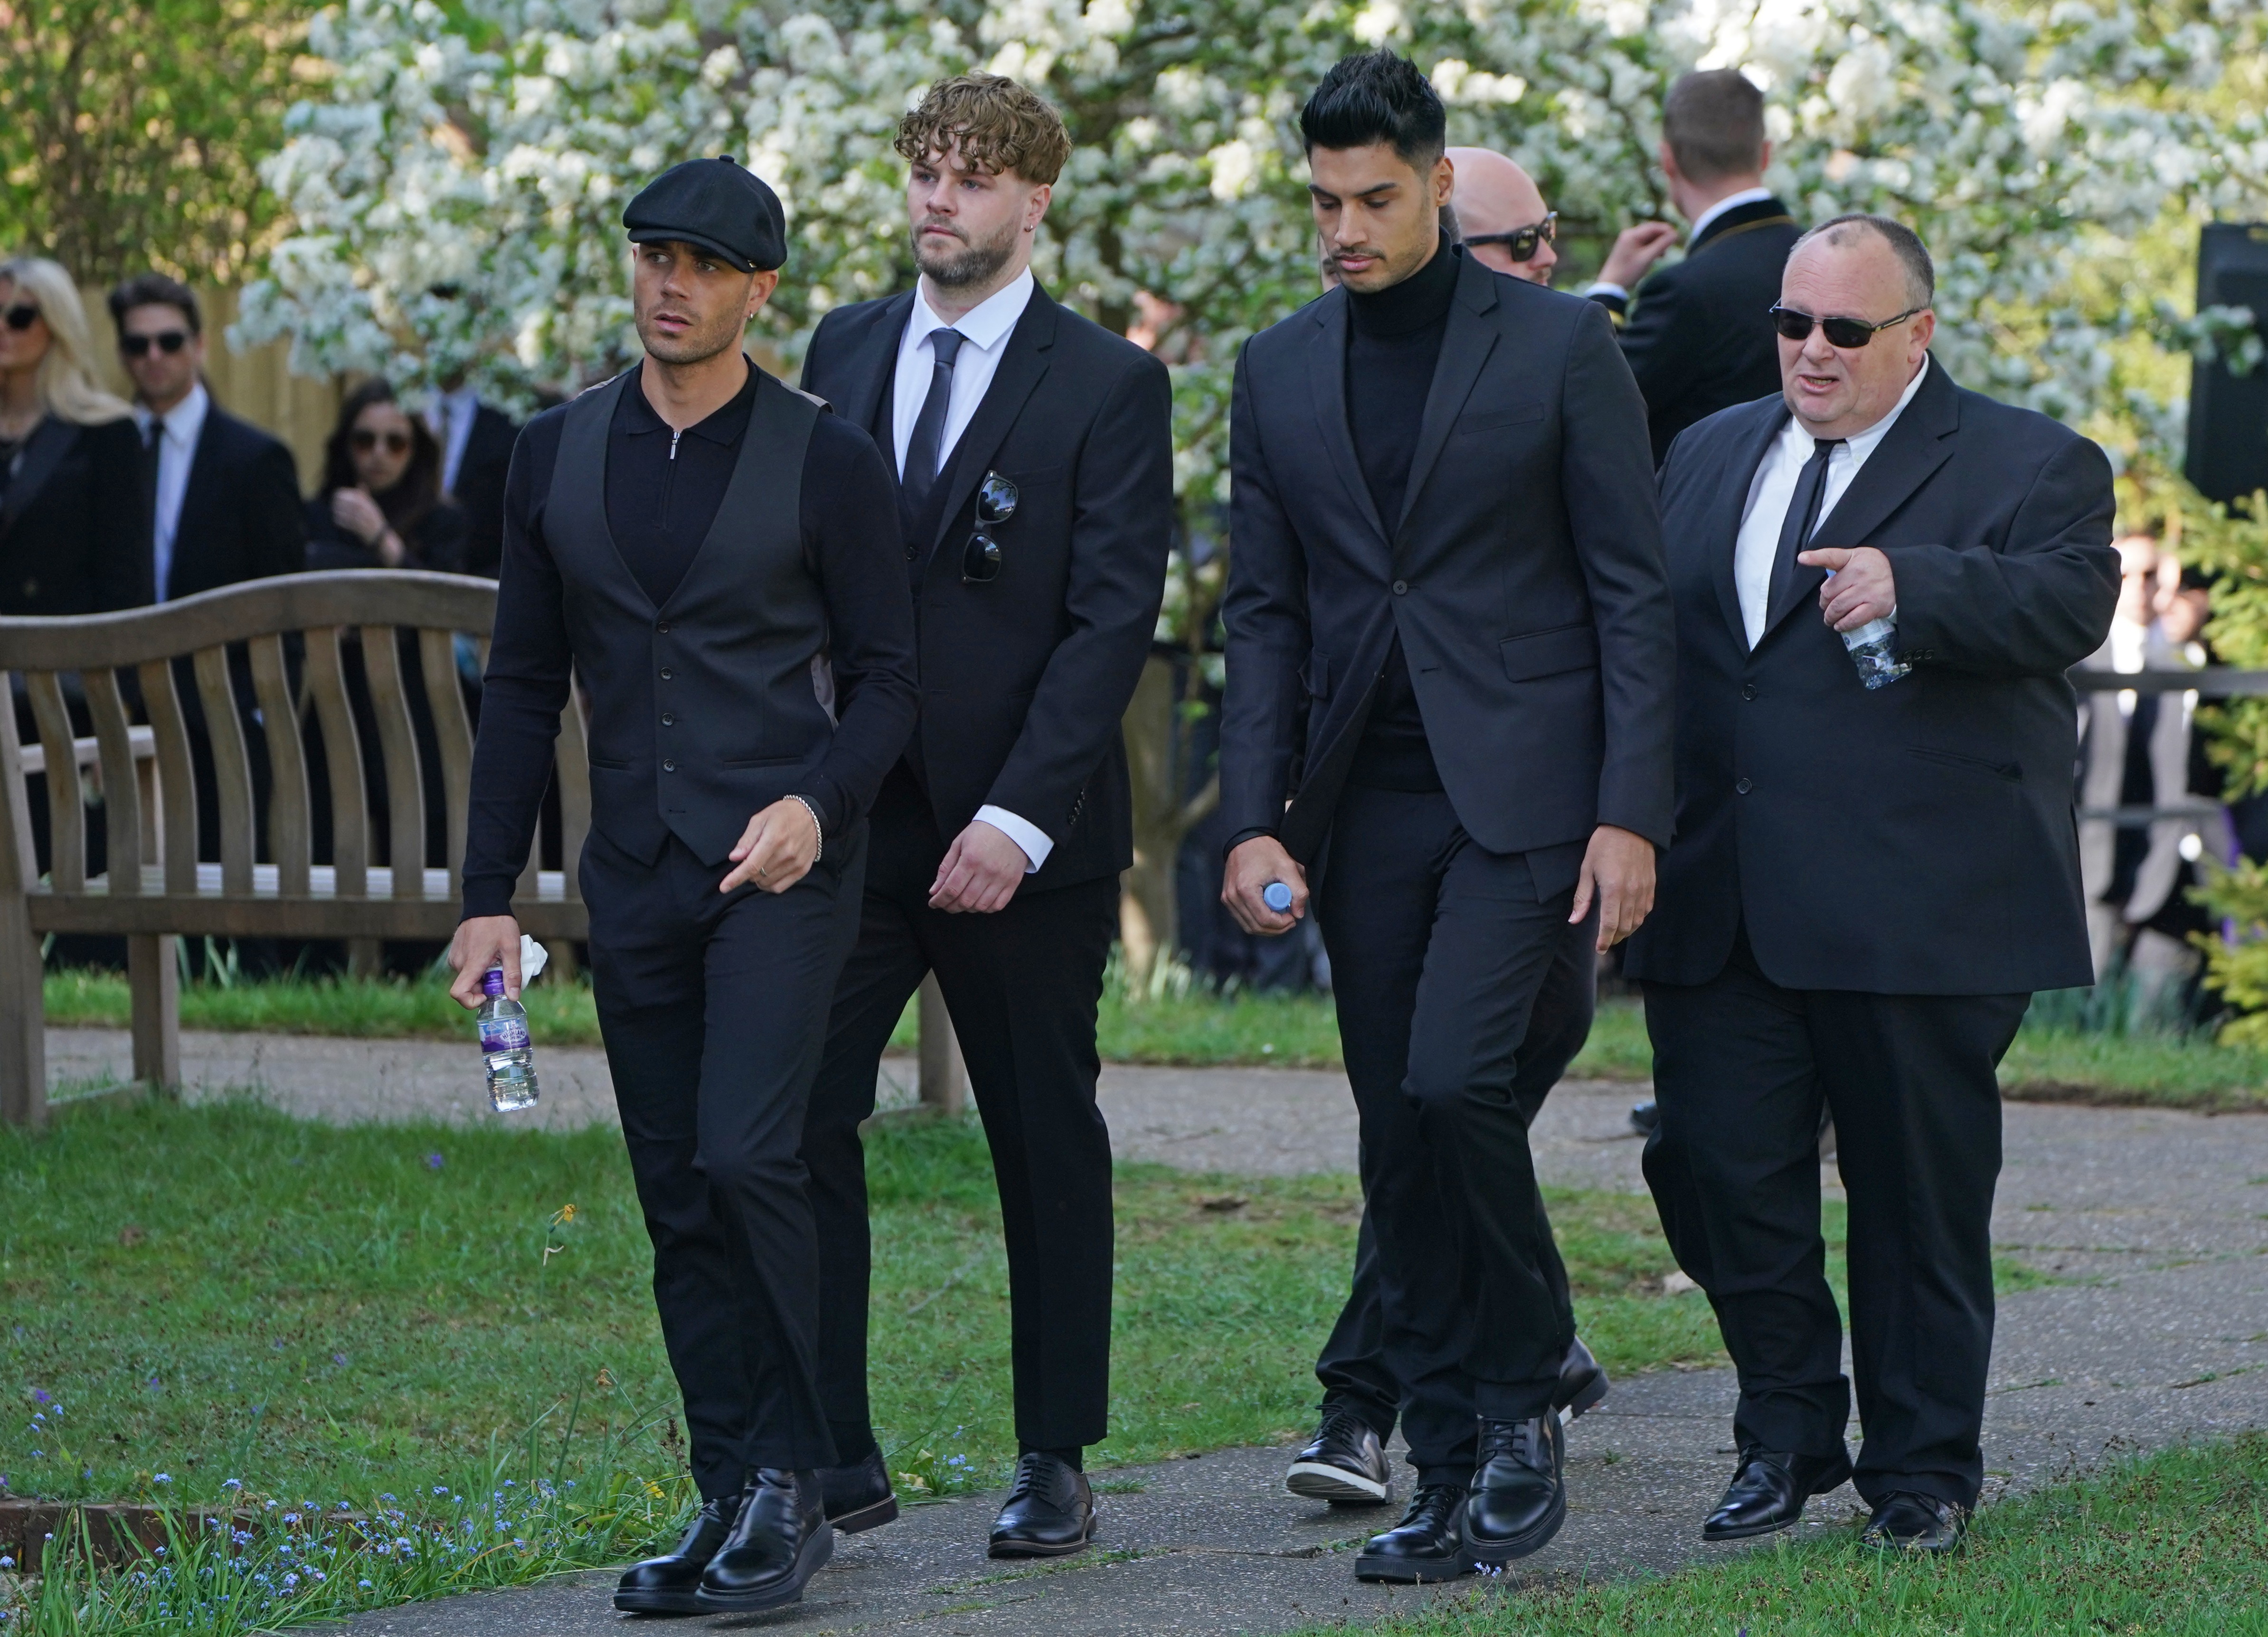 The members of The Wanted (left to right) Max George, Jay McGuiness and Siva Kaneswaran arrive for the funeral of The Wanted star Tom Parker in Queensway, Petts Wood, in south-east London,, following his death at the age of 33 last month, 17 months after  (Foto: PA Images via Getty Images)